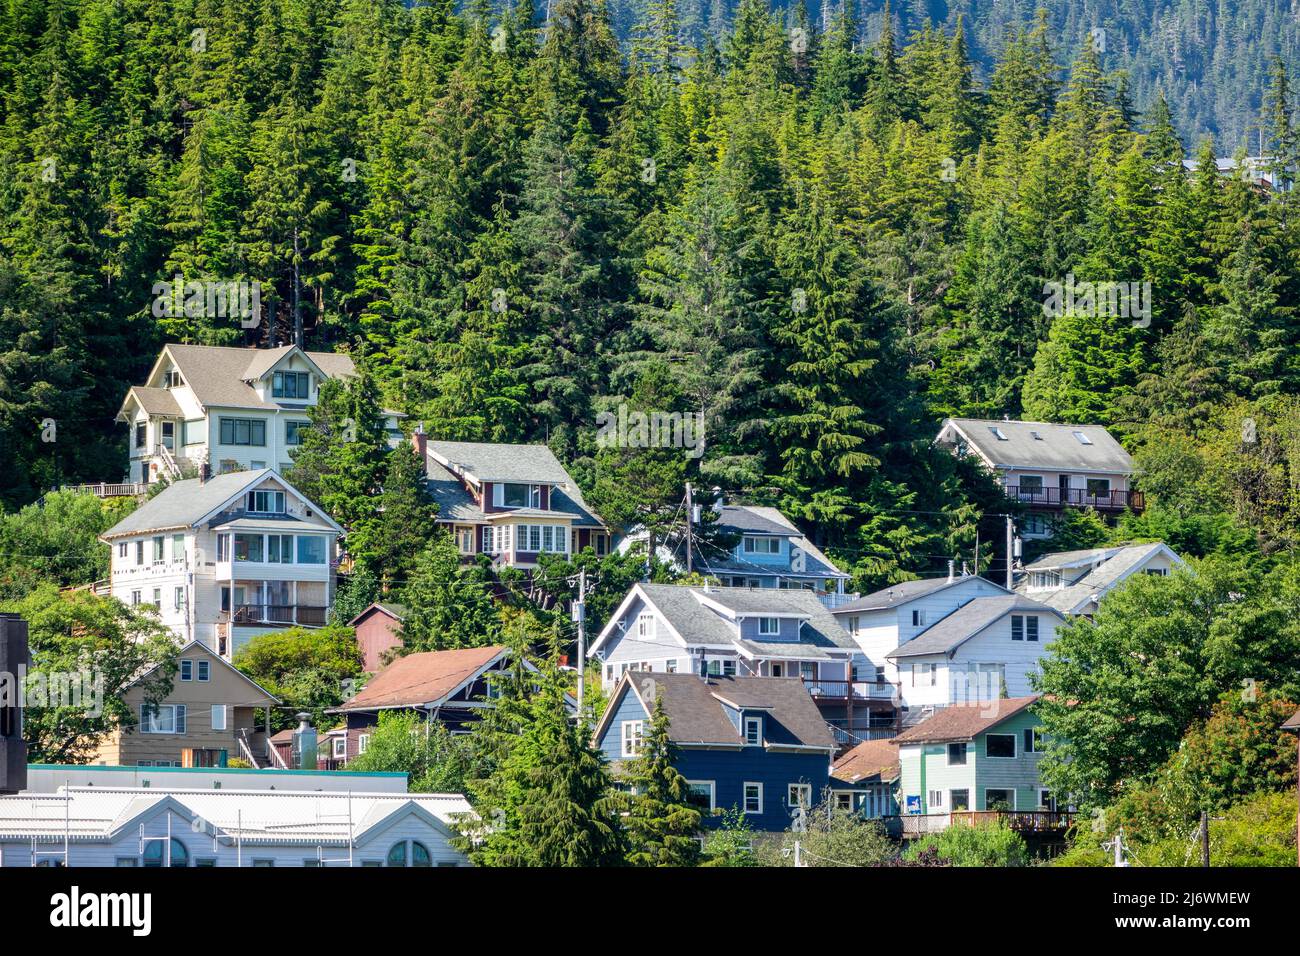 Residential Houses On A Hill With Pine Trees Above Ketchikan City In Alaska Stock Photo